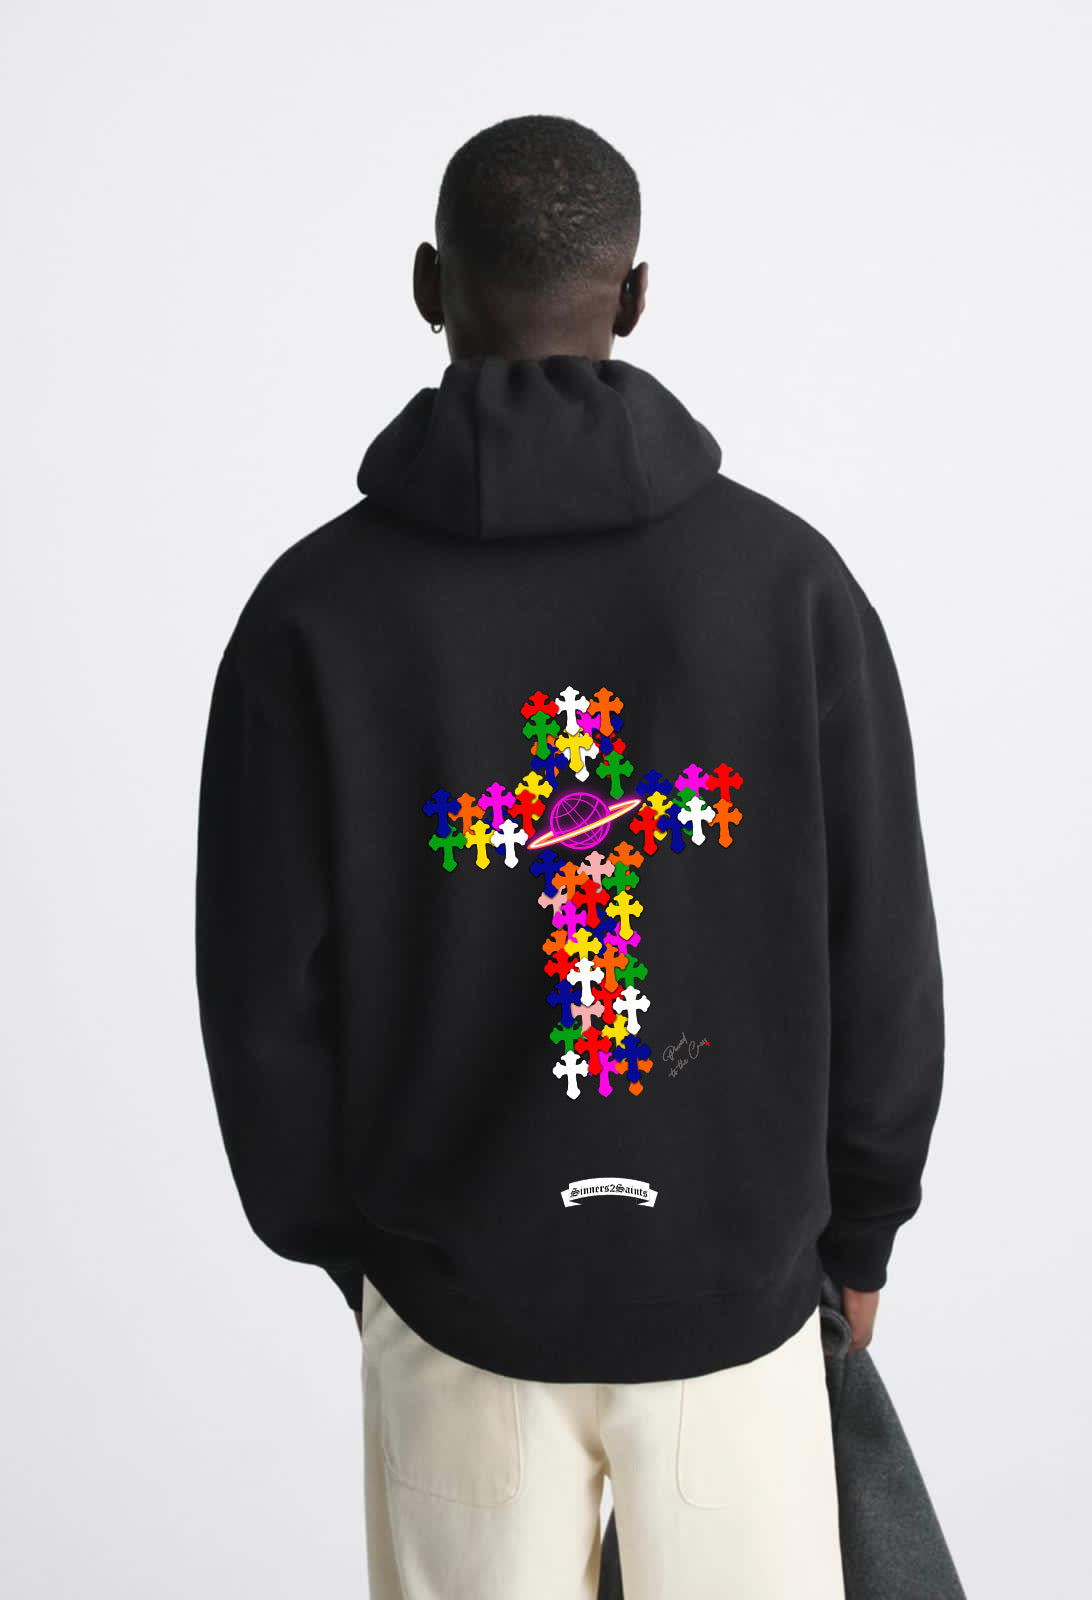 Pinned to the Cross - Special Release - Limited Edition Hoodie (Only 23 Made - No restock) - Sinners2Saints